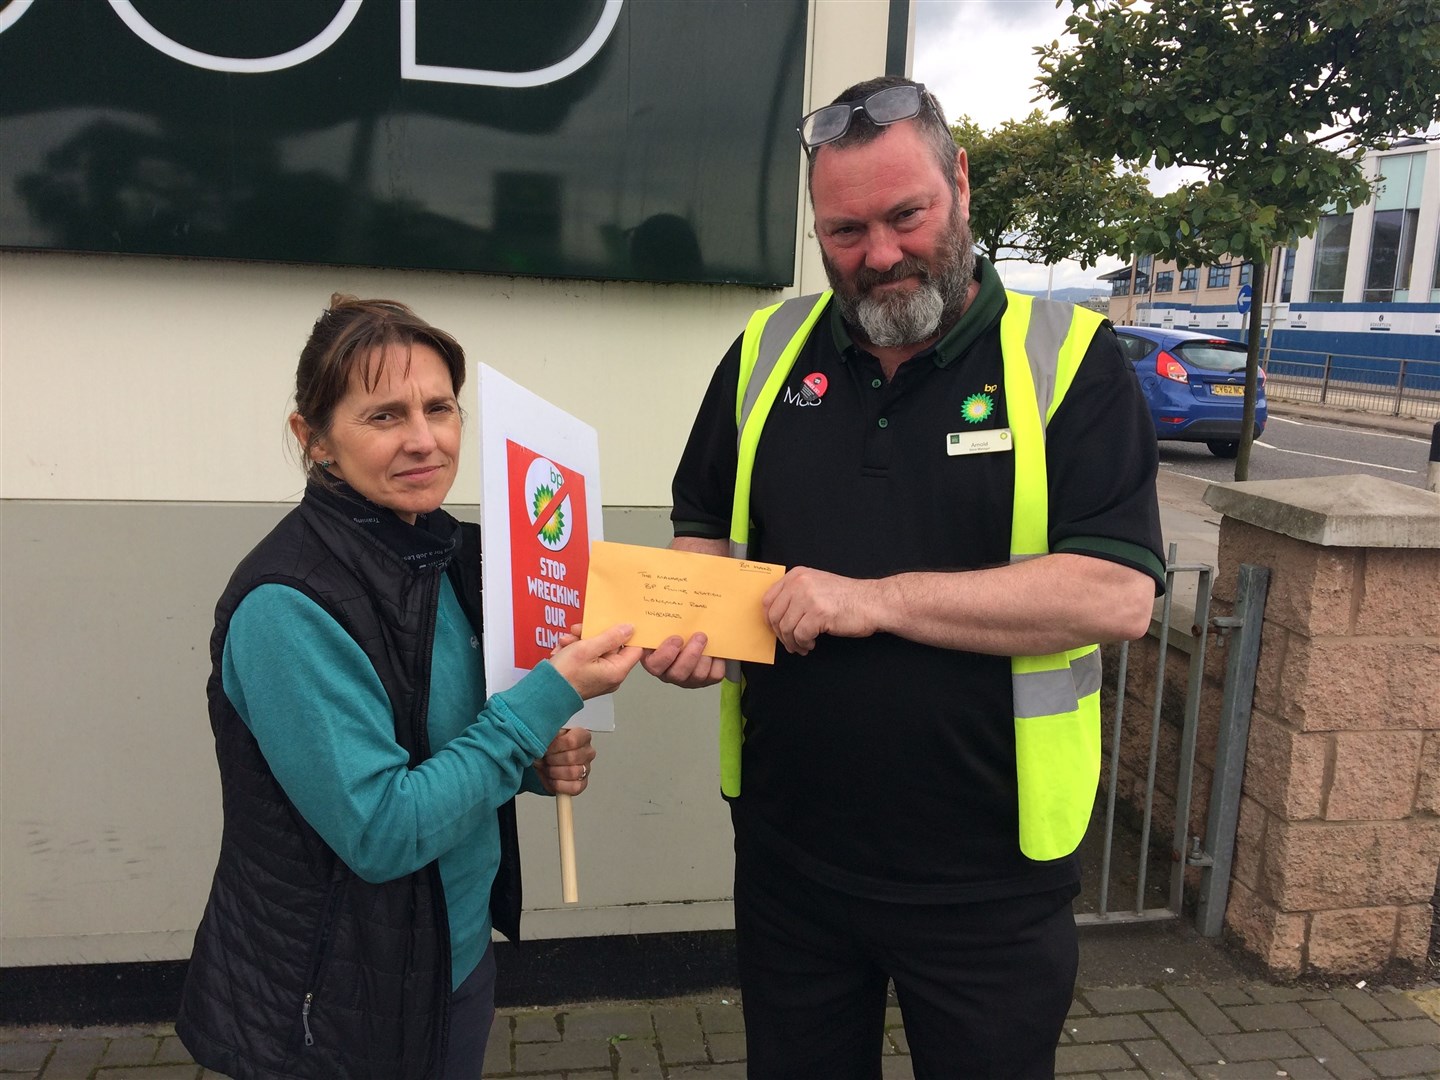 Jo Paterson (left) hands over the letter to a BP manager in Inverness following what was described as a good-natured protest.